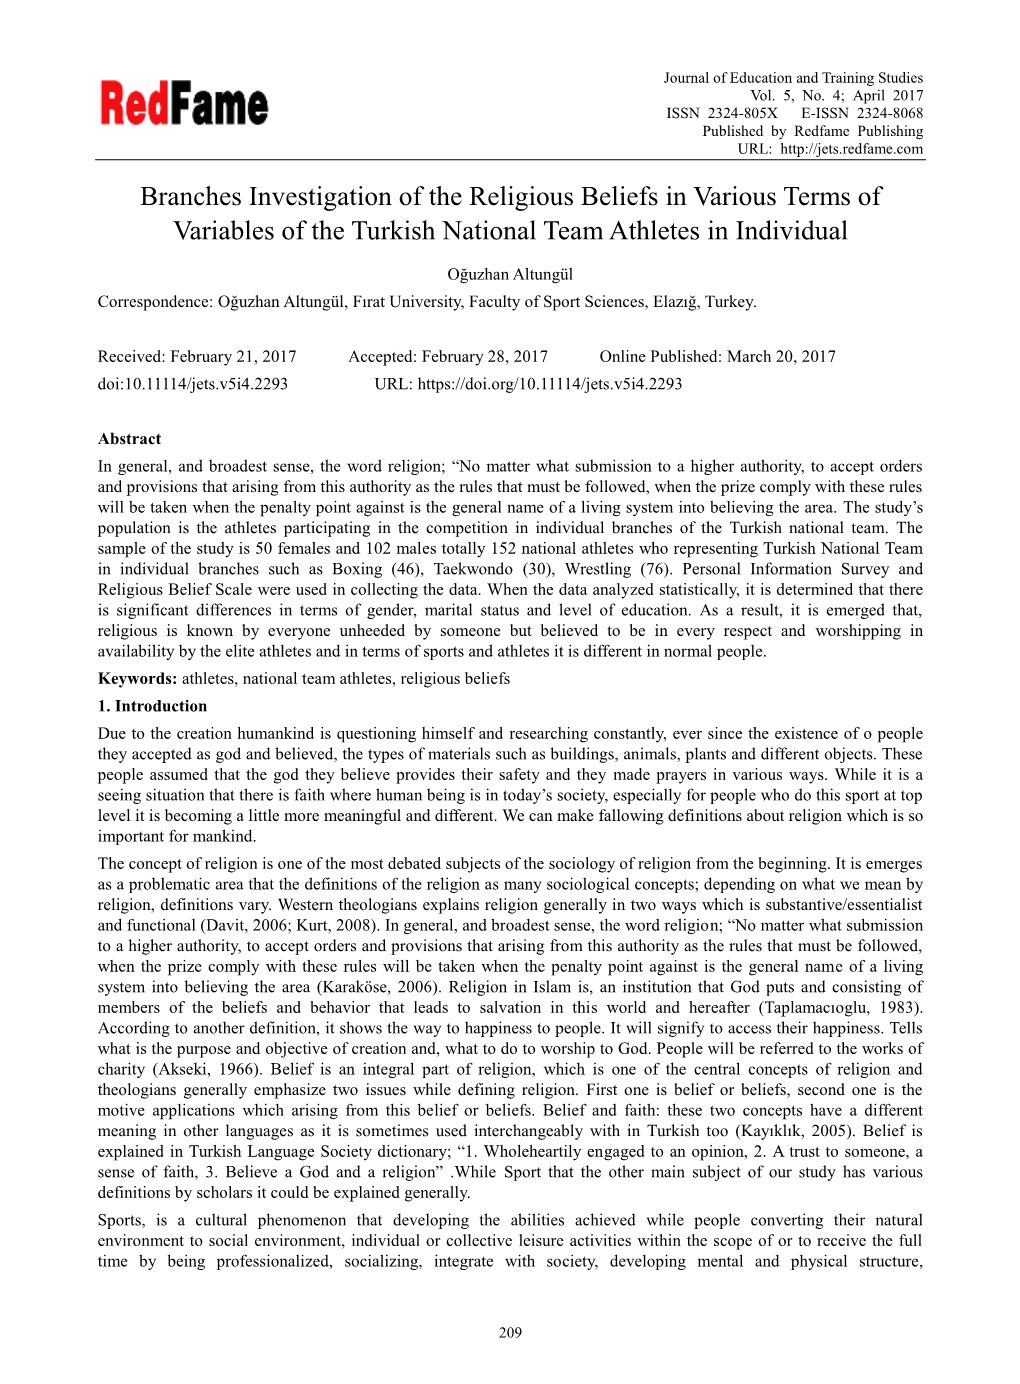 Branches Investigation of the Religious Beliefs in Various Terms of Variables of the Turkish National Team Athletes in Individual